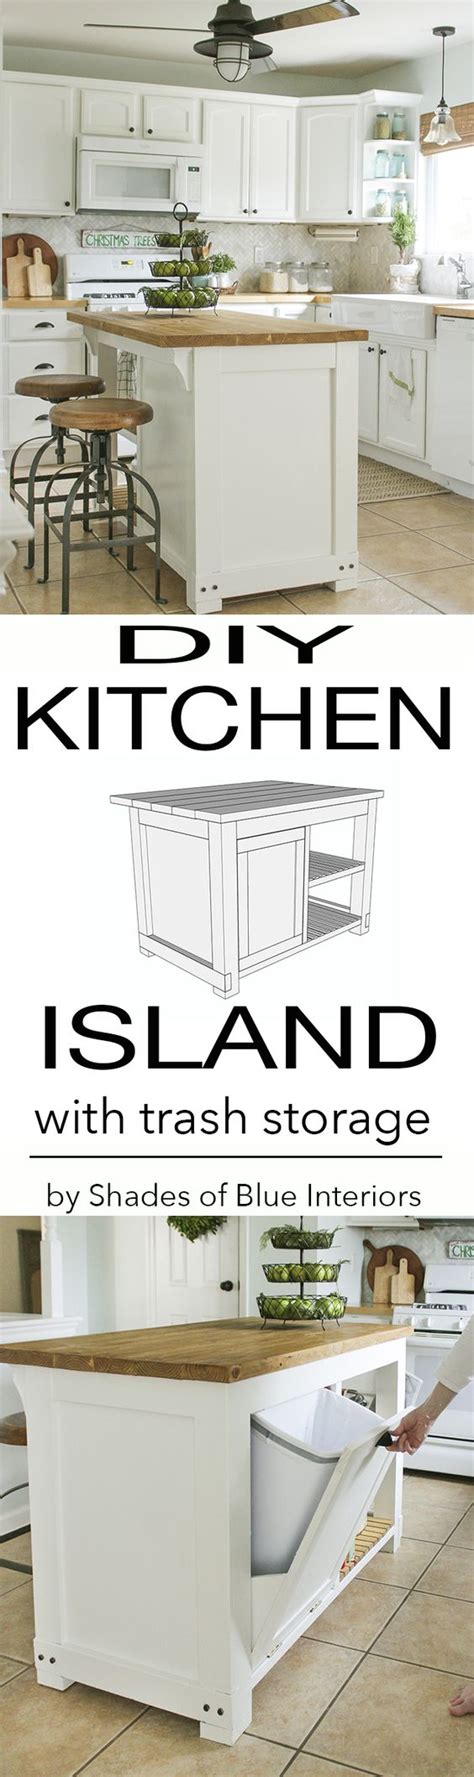 The installation costs for this kind of island skyrocket due to the addition of plumbing. 25 Gorgeous DIY Kitchen Islands to Make Your Kitchen Run ...